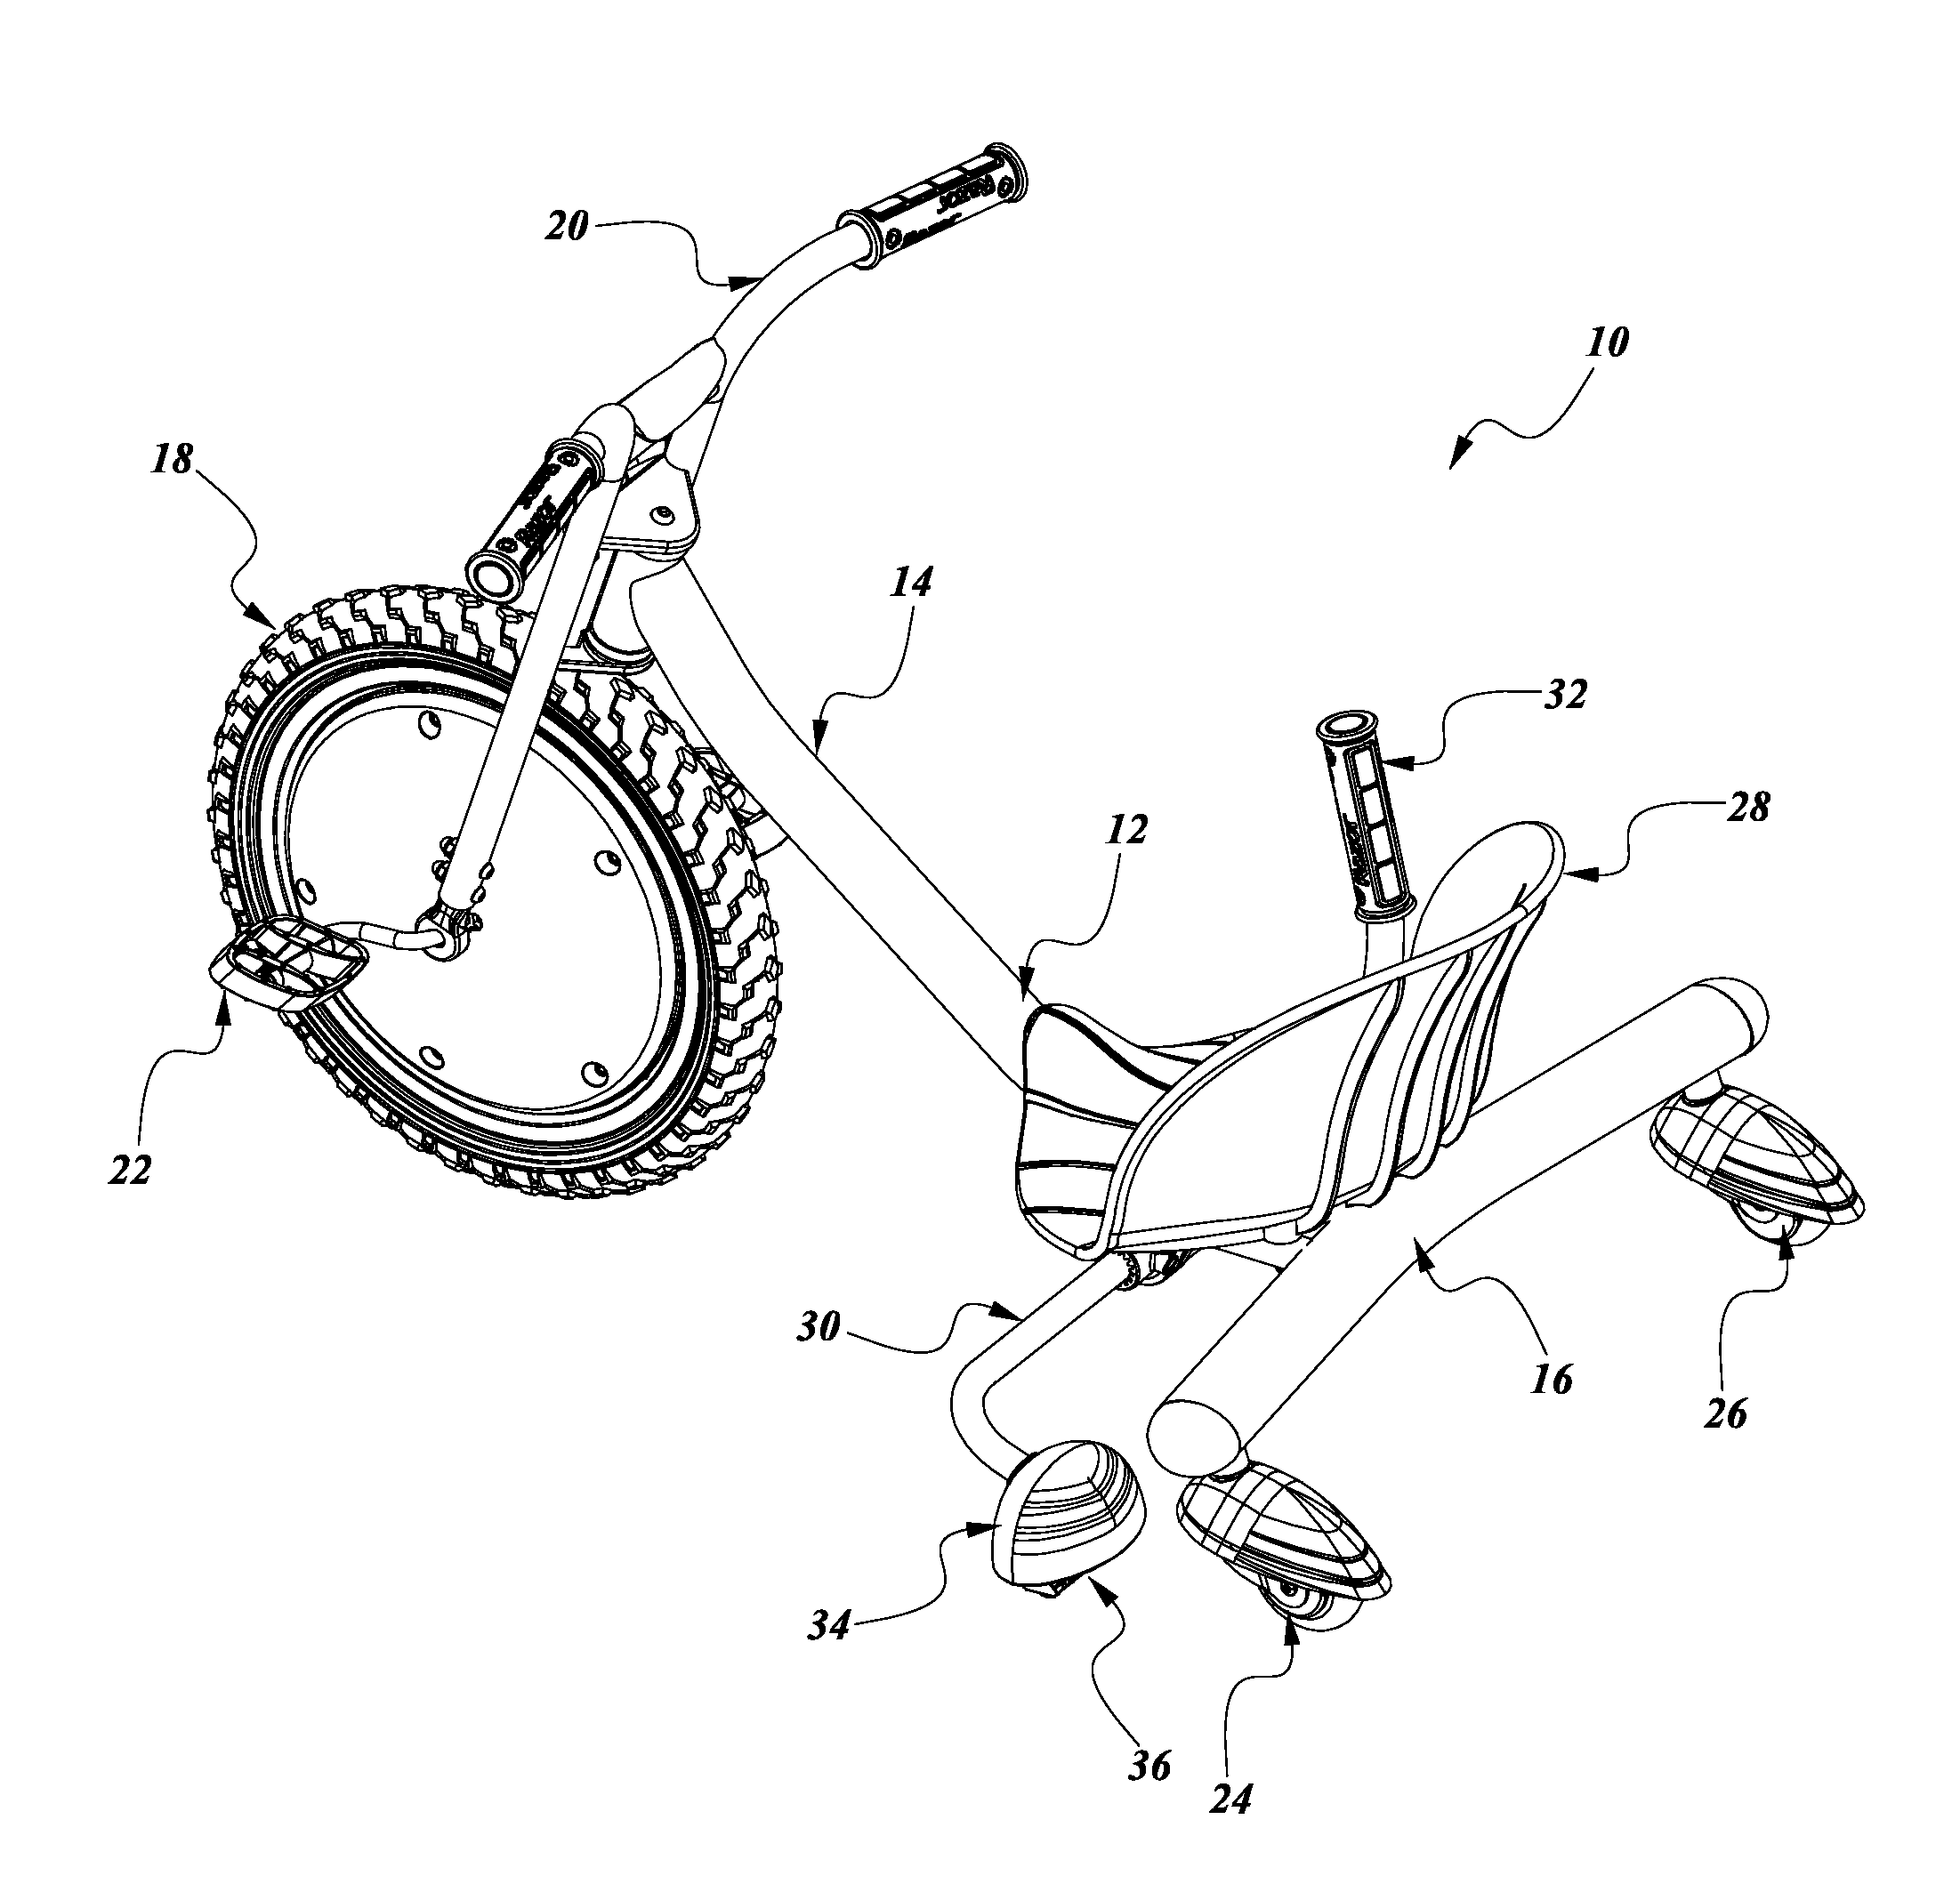 Sparking device for a personal mobility vehicle